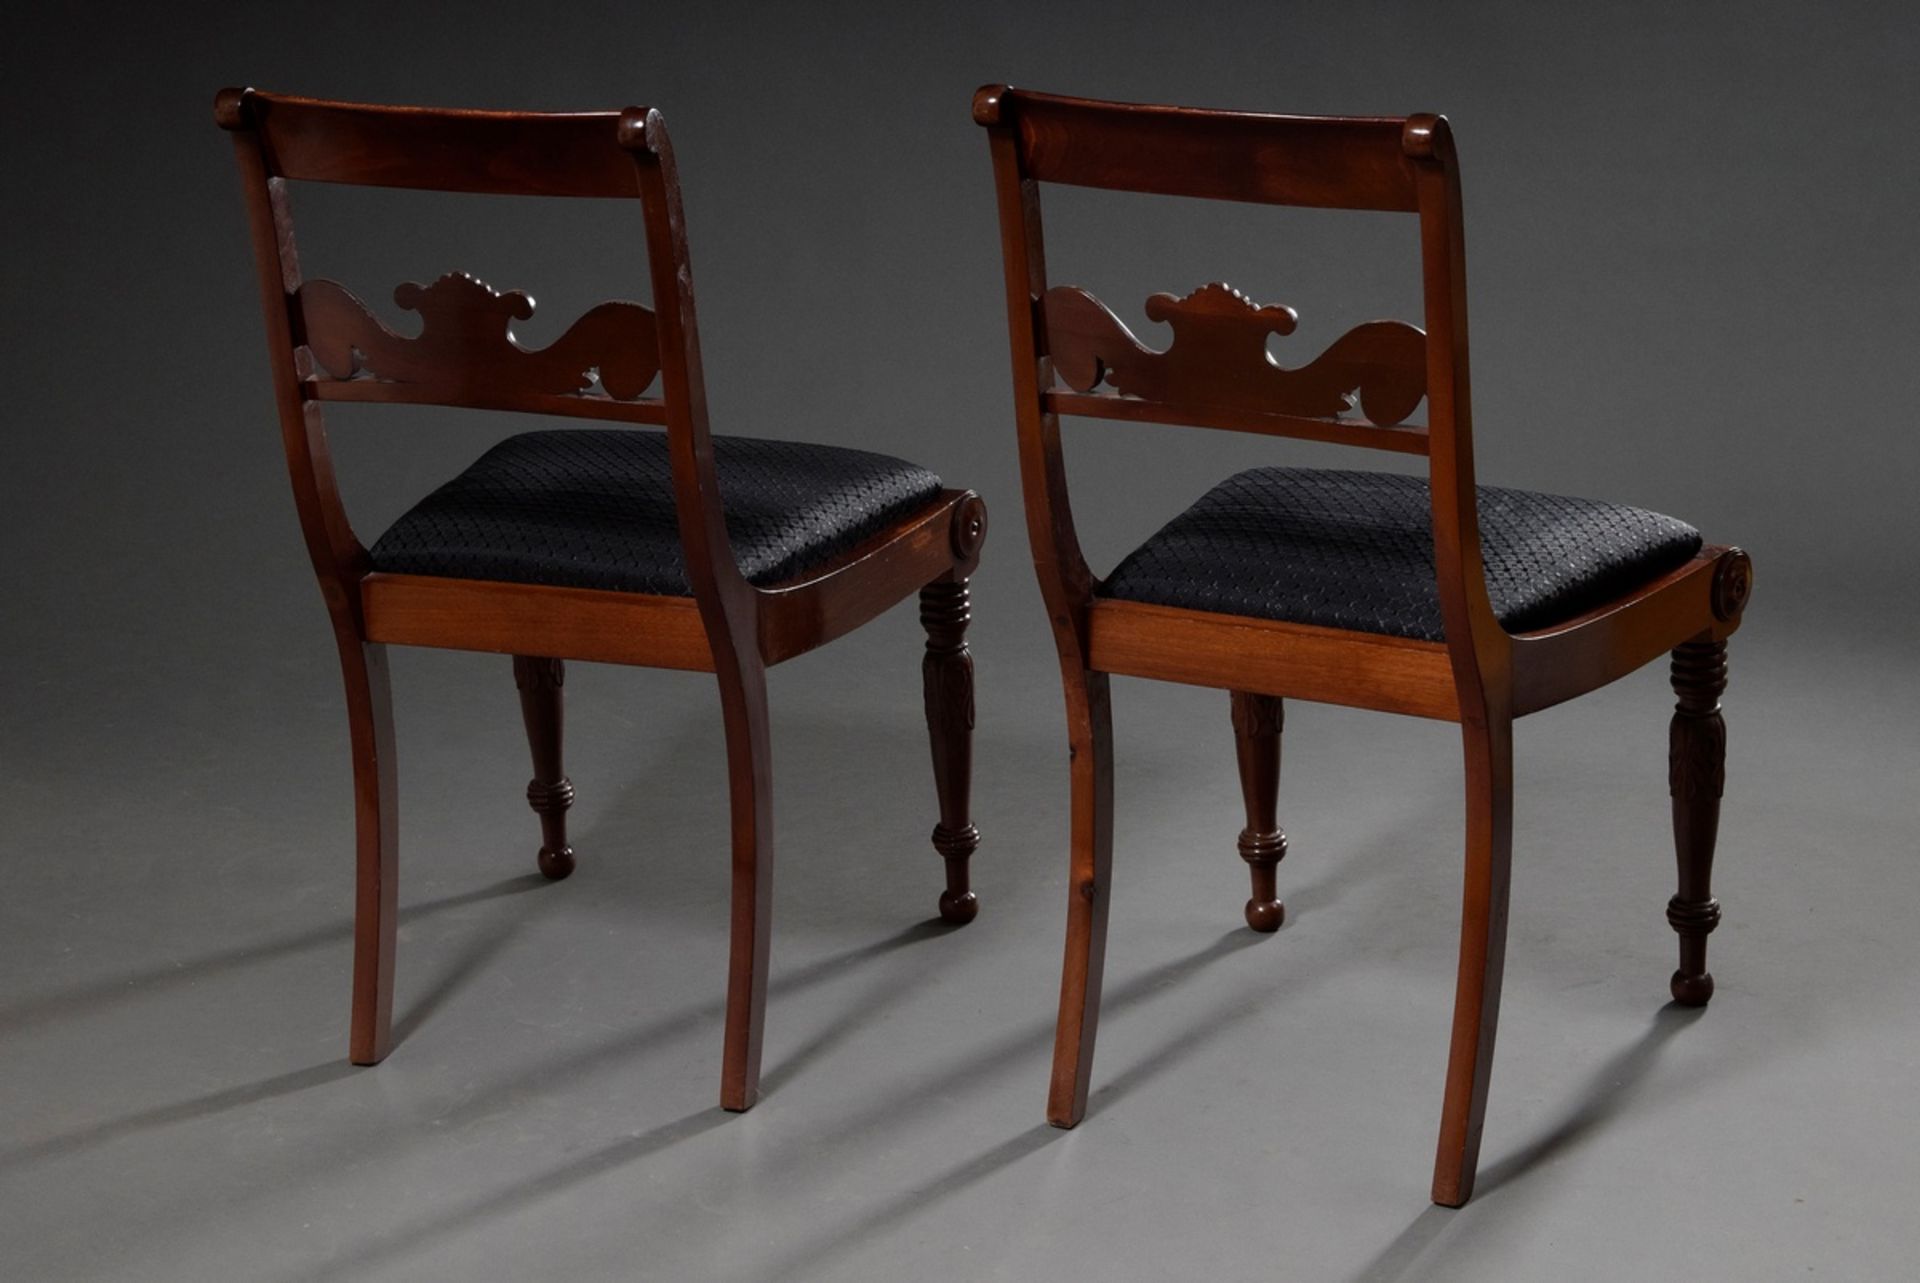 Pair of Biedermeier chairs with floral carved back board, turned legs and horsehair upholstery, mah - Image 2 of 6